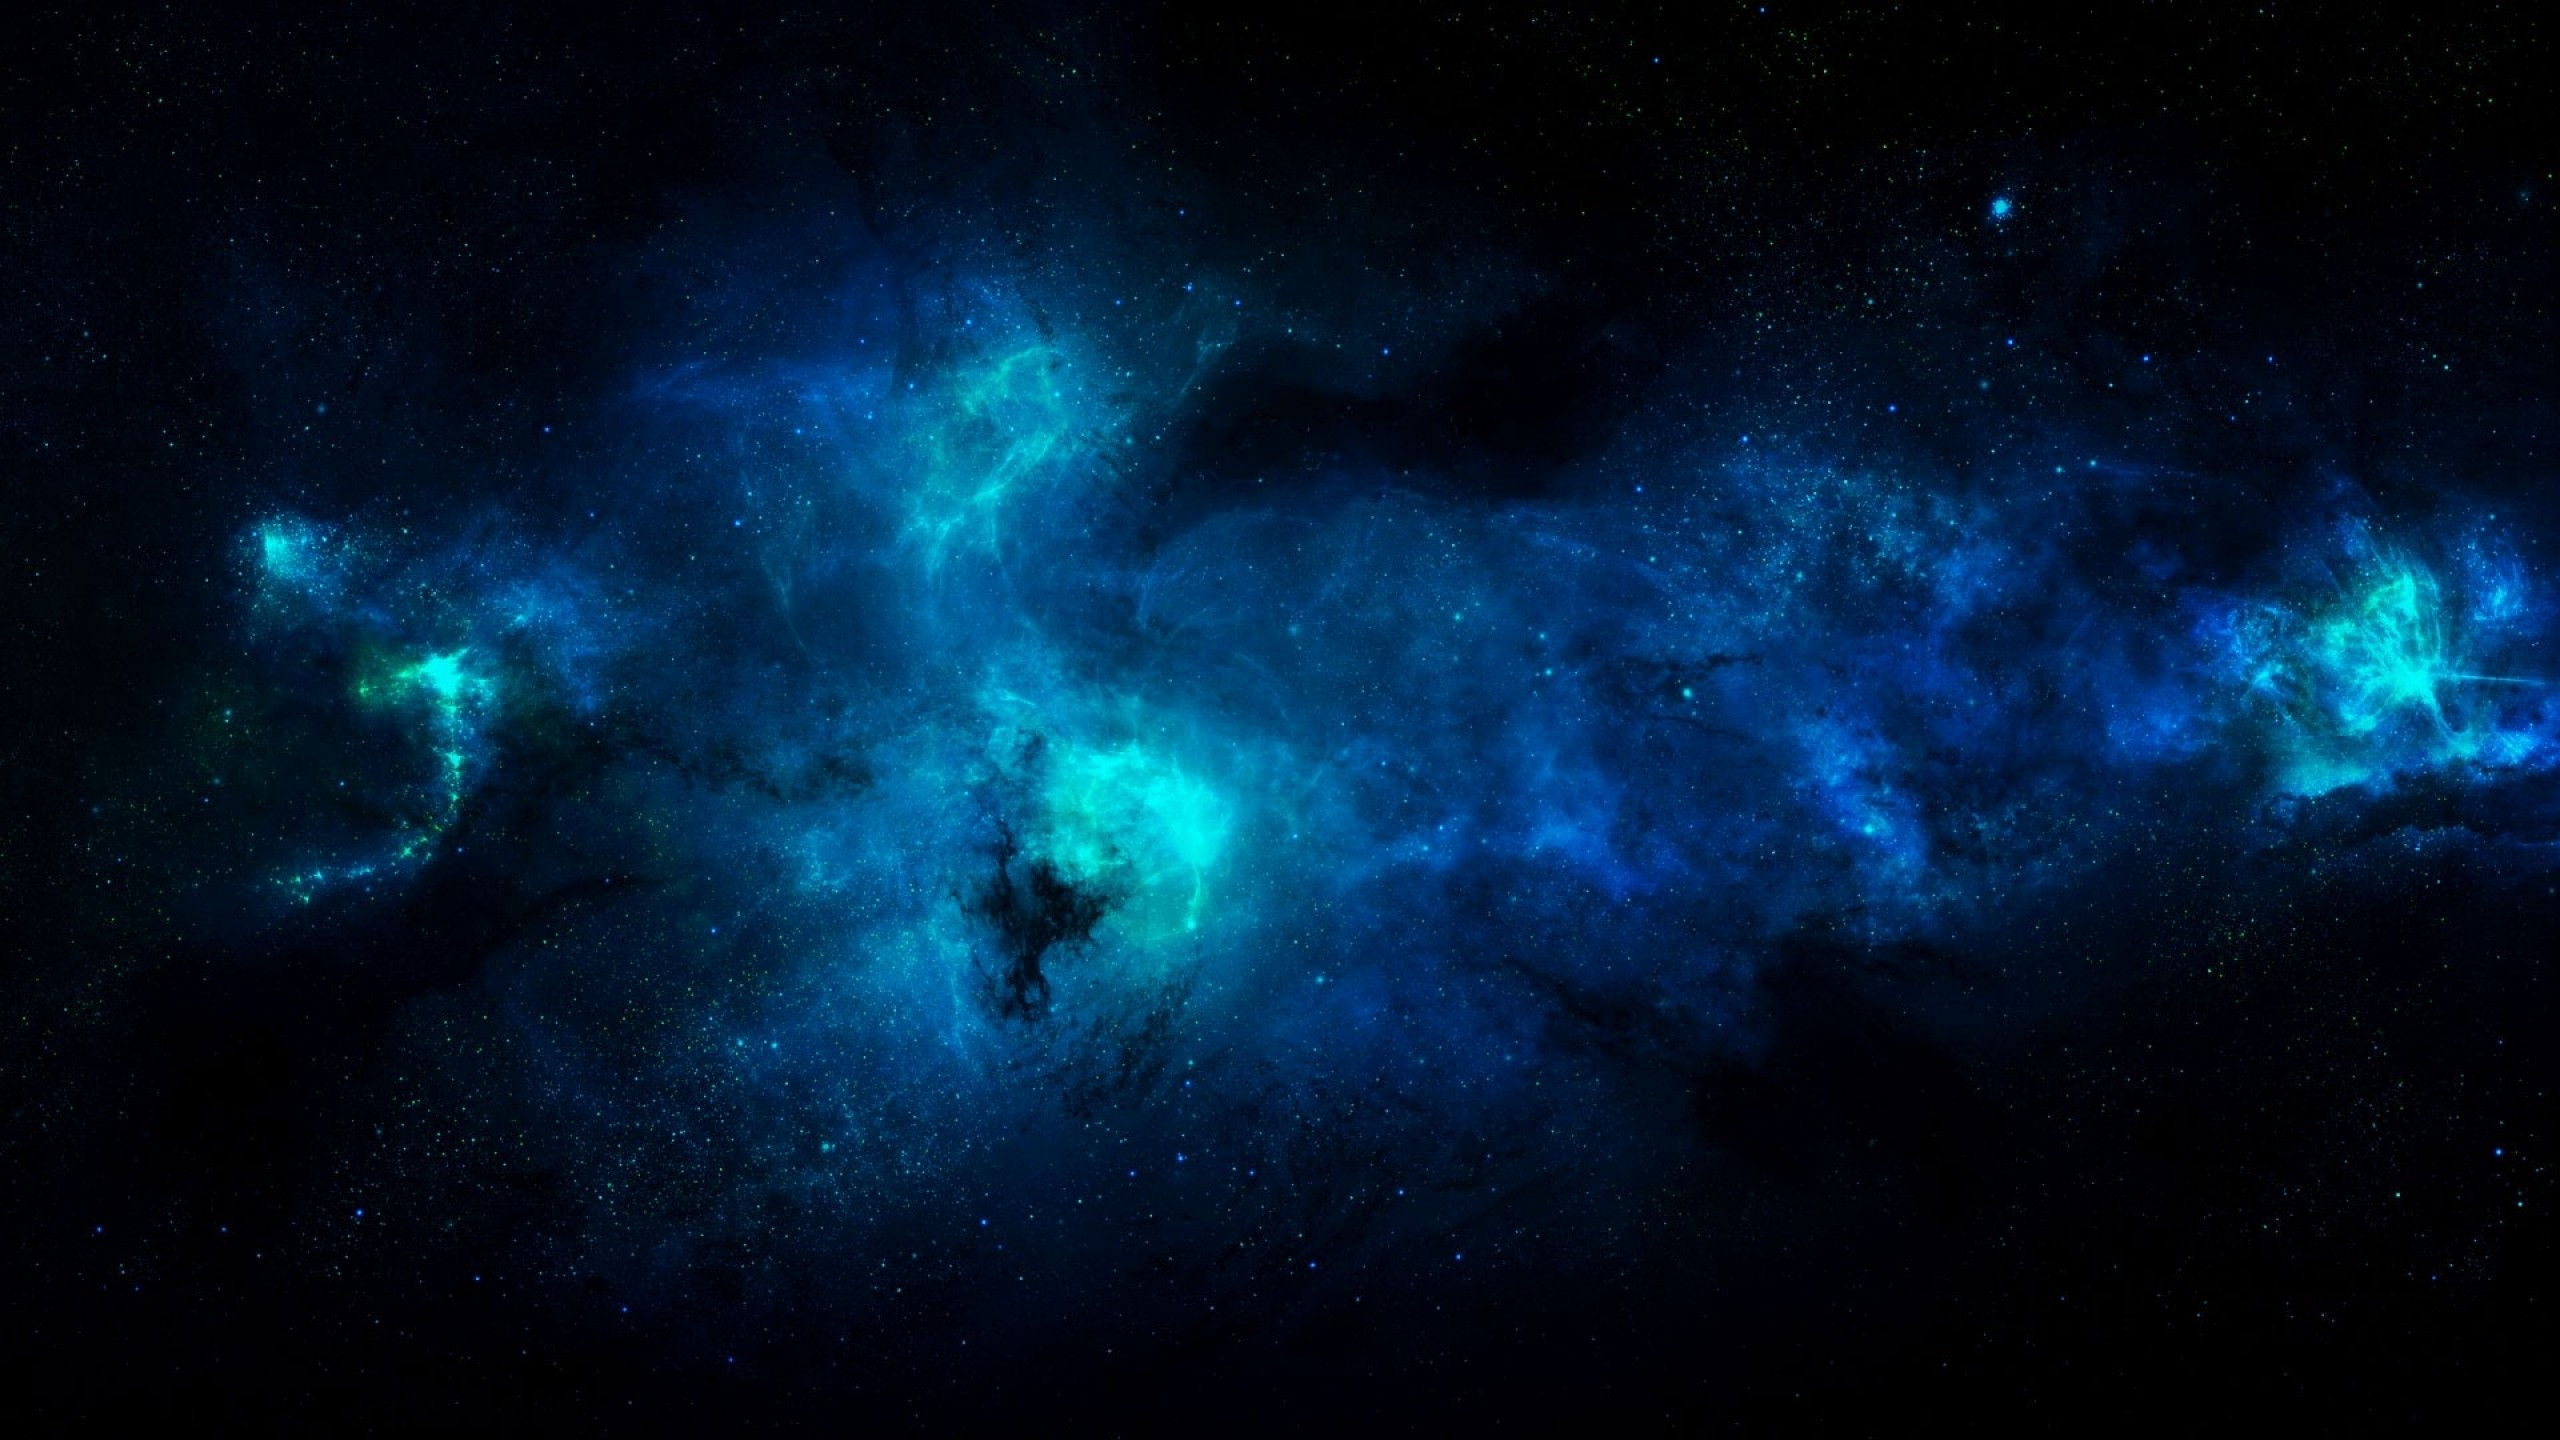 Download 2560x1440 Blue Nebula, Stars, Galaxy, Outer Space Wallpaper for iMac 27 inch